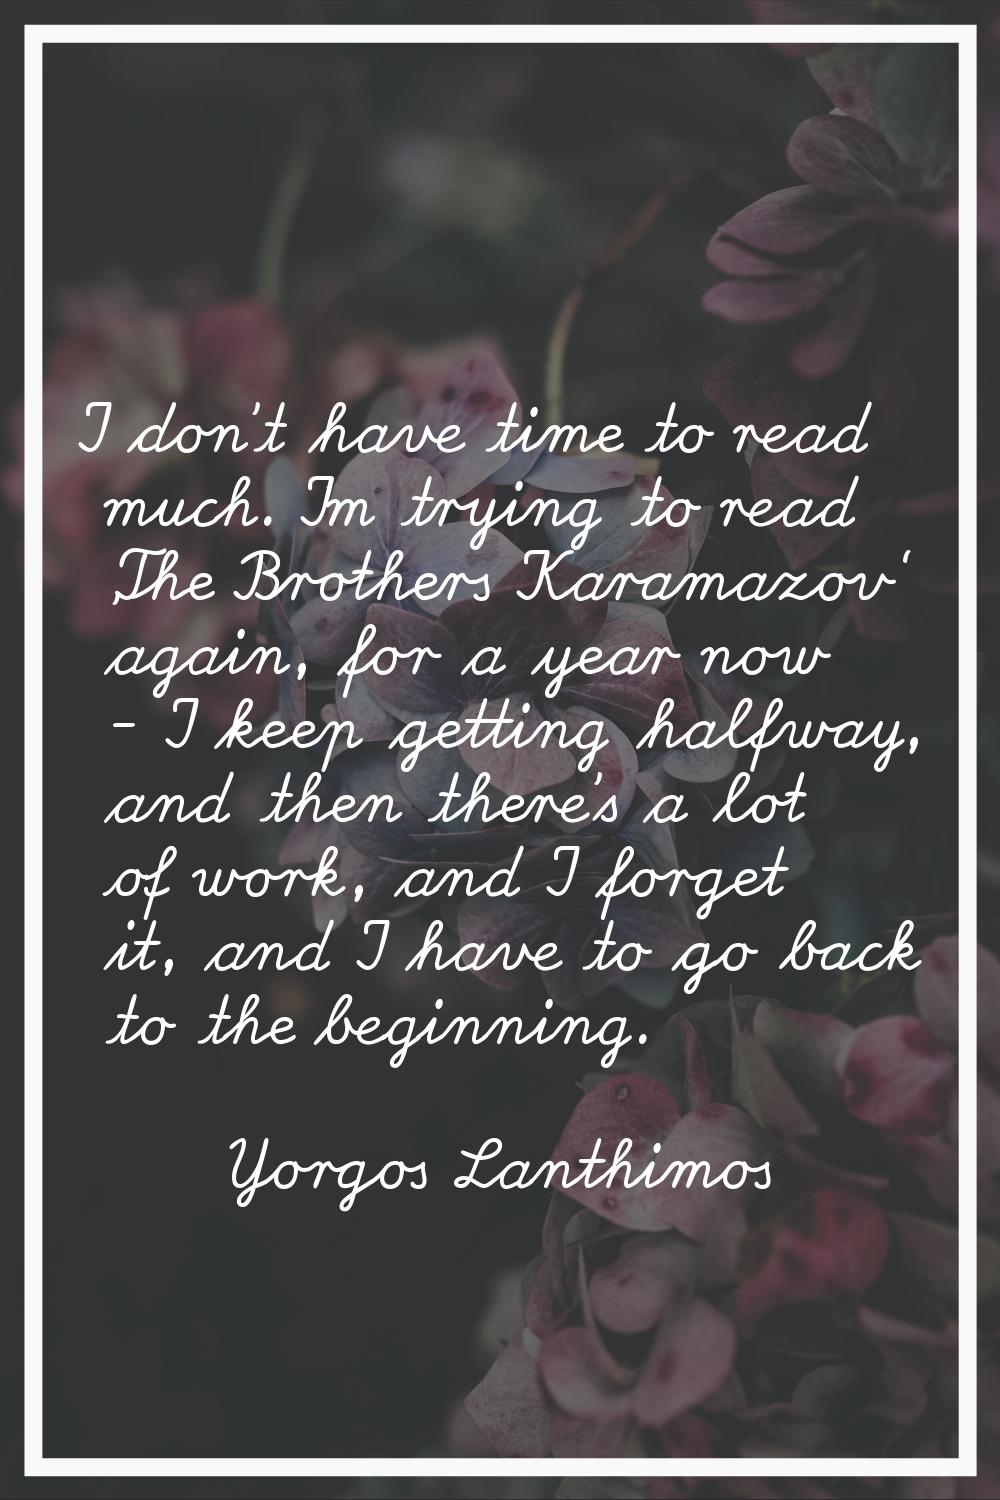 I don't have time to read much. I'm trying to read 'The Brothers Karamazov' again, for a year now -